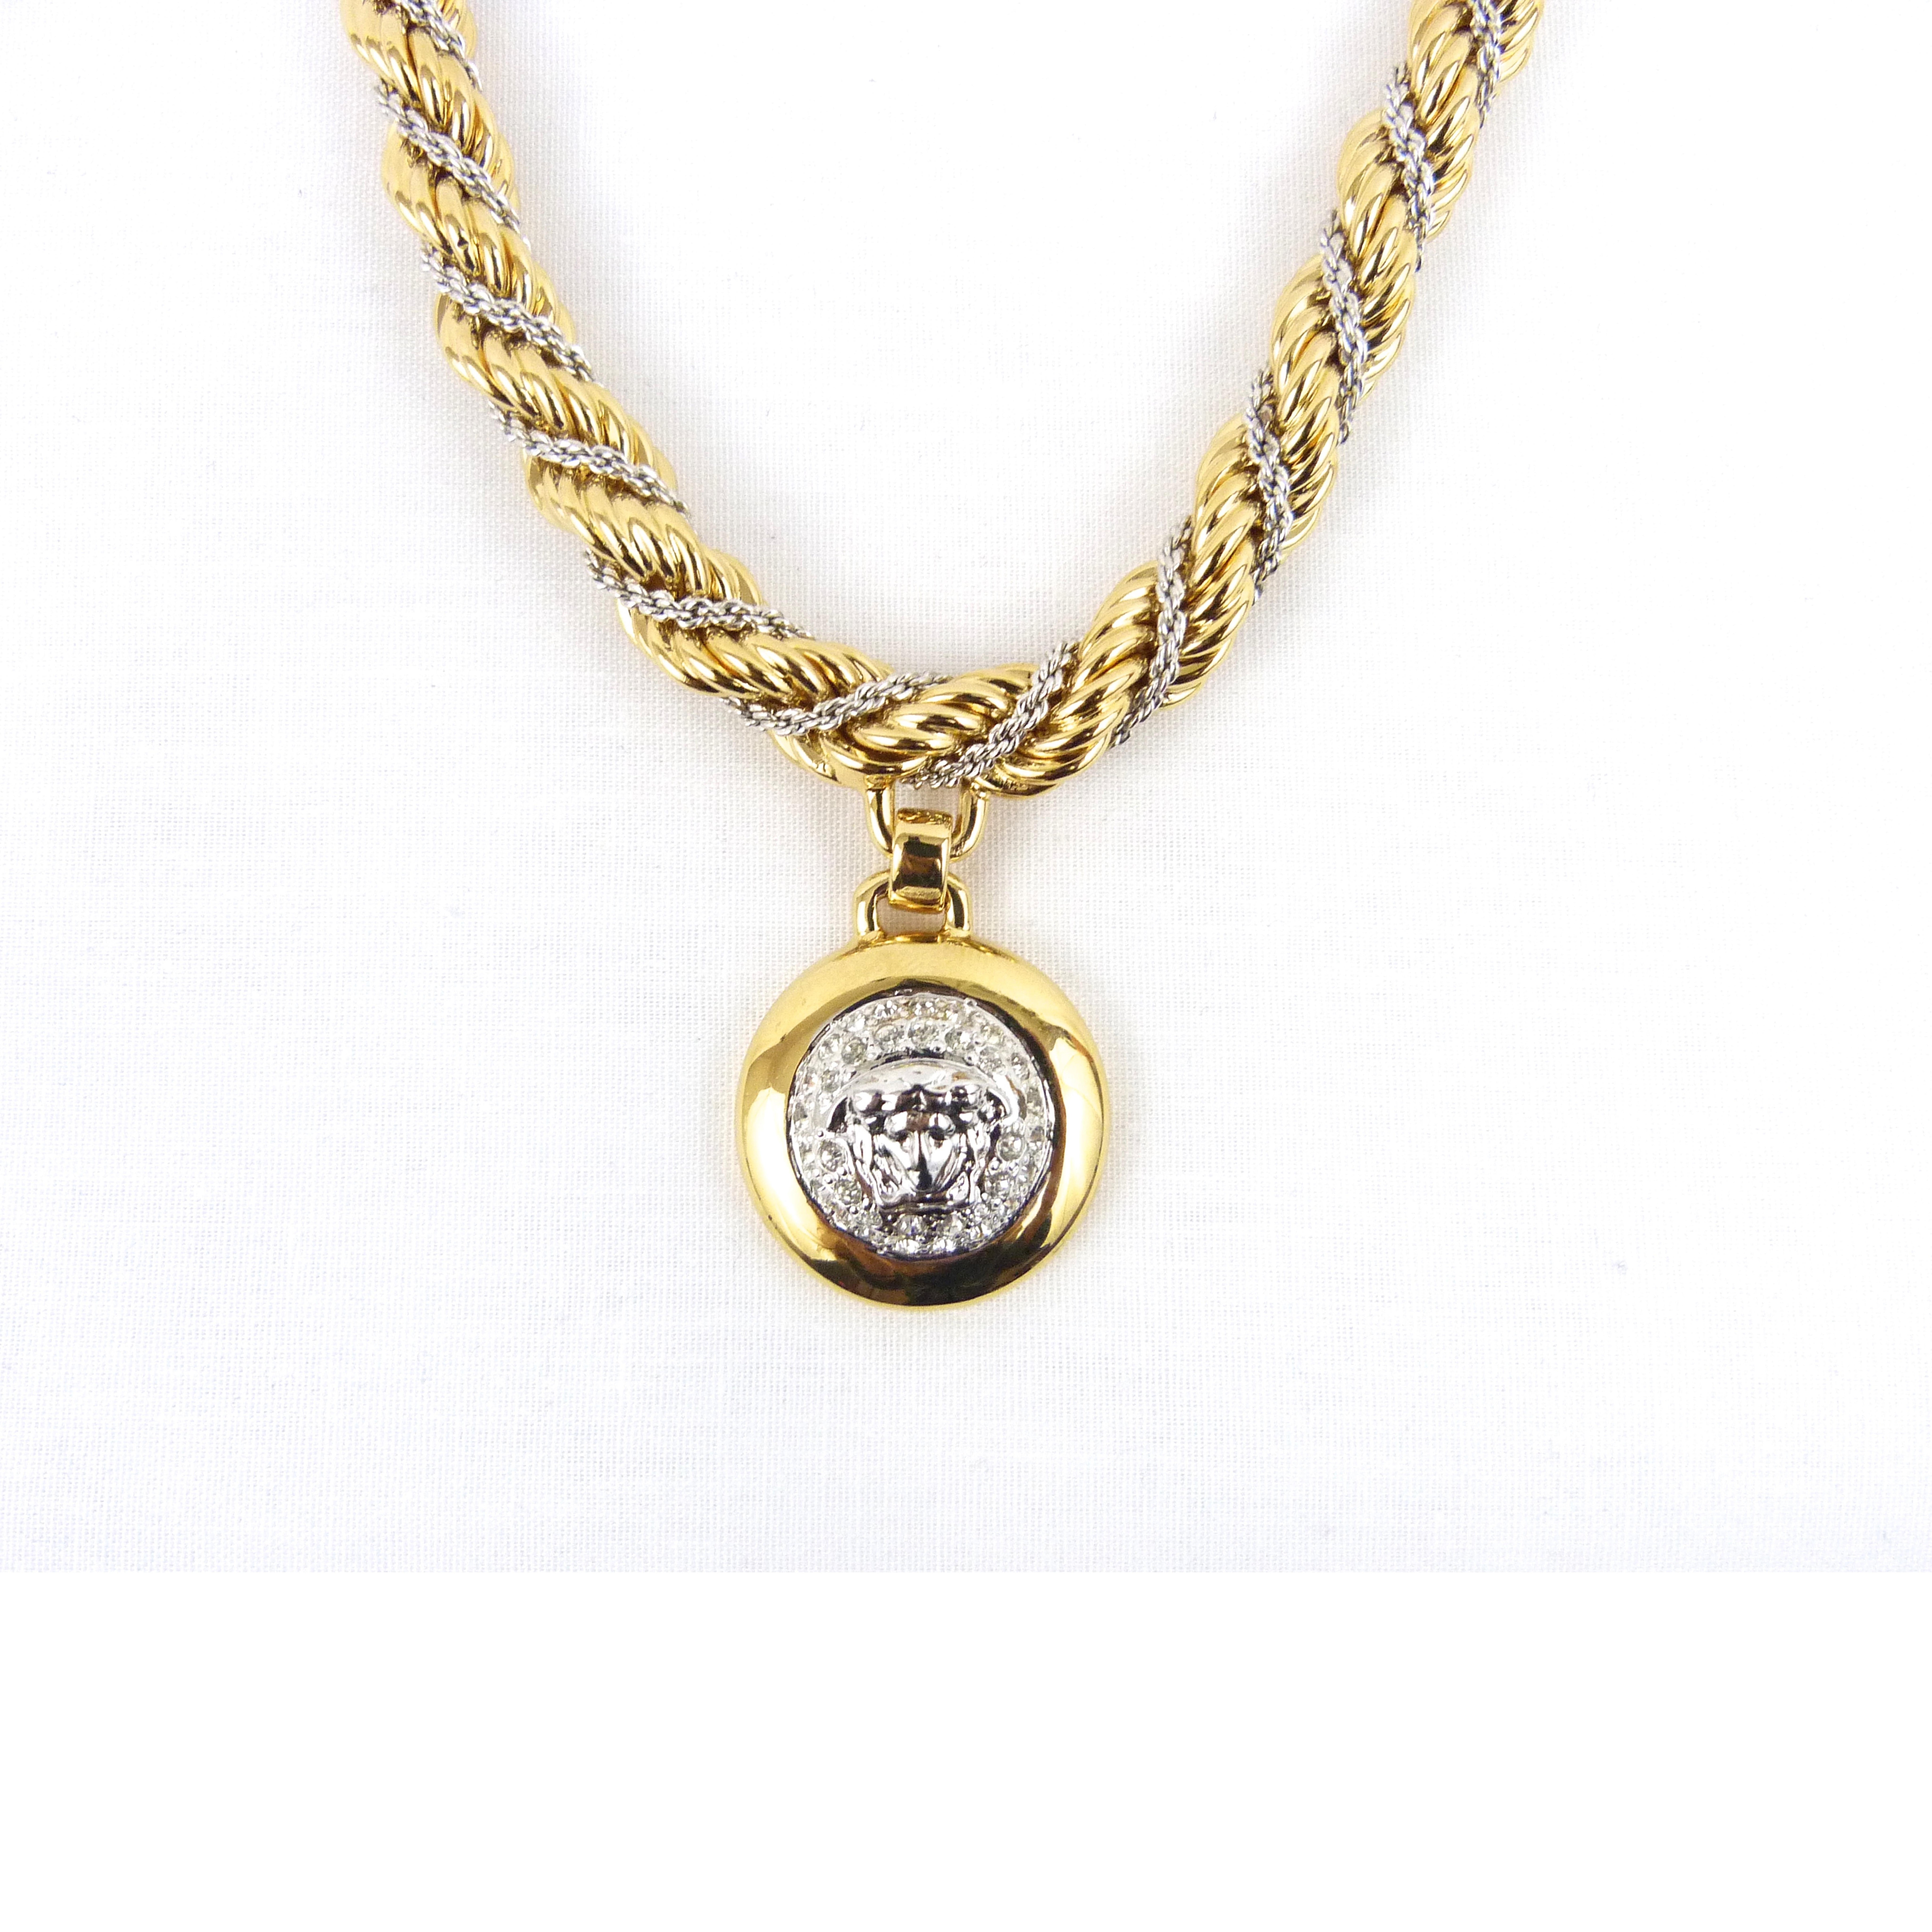 This Gianni Versace necklace is made up of a gold tone metal rope style chain, interlinked with a finer silver rope attached is the medusa head pendent with a cluster of crystals circling the motif. This piece is from Gianni Versace's final